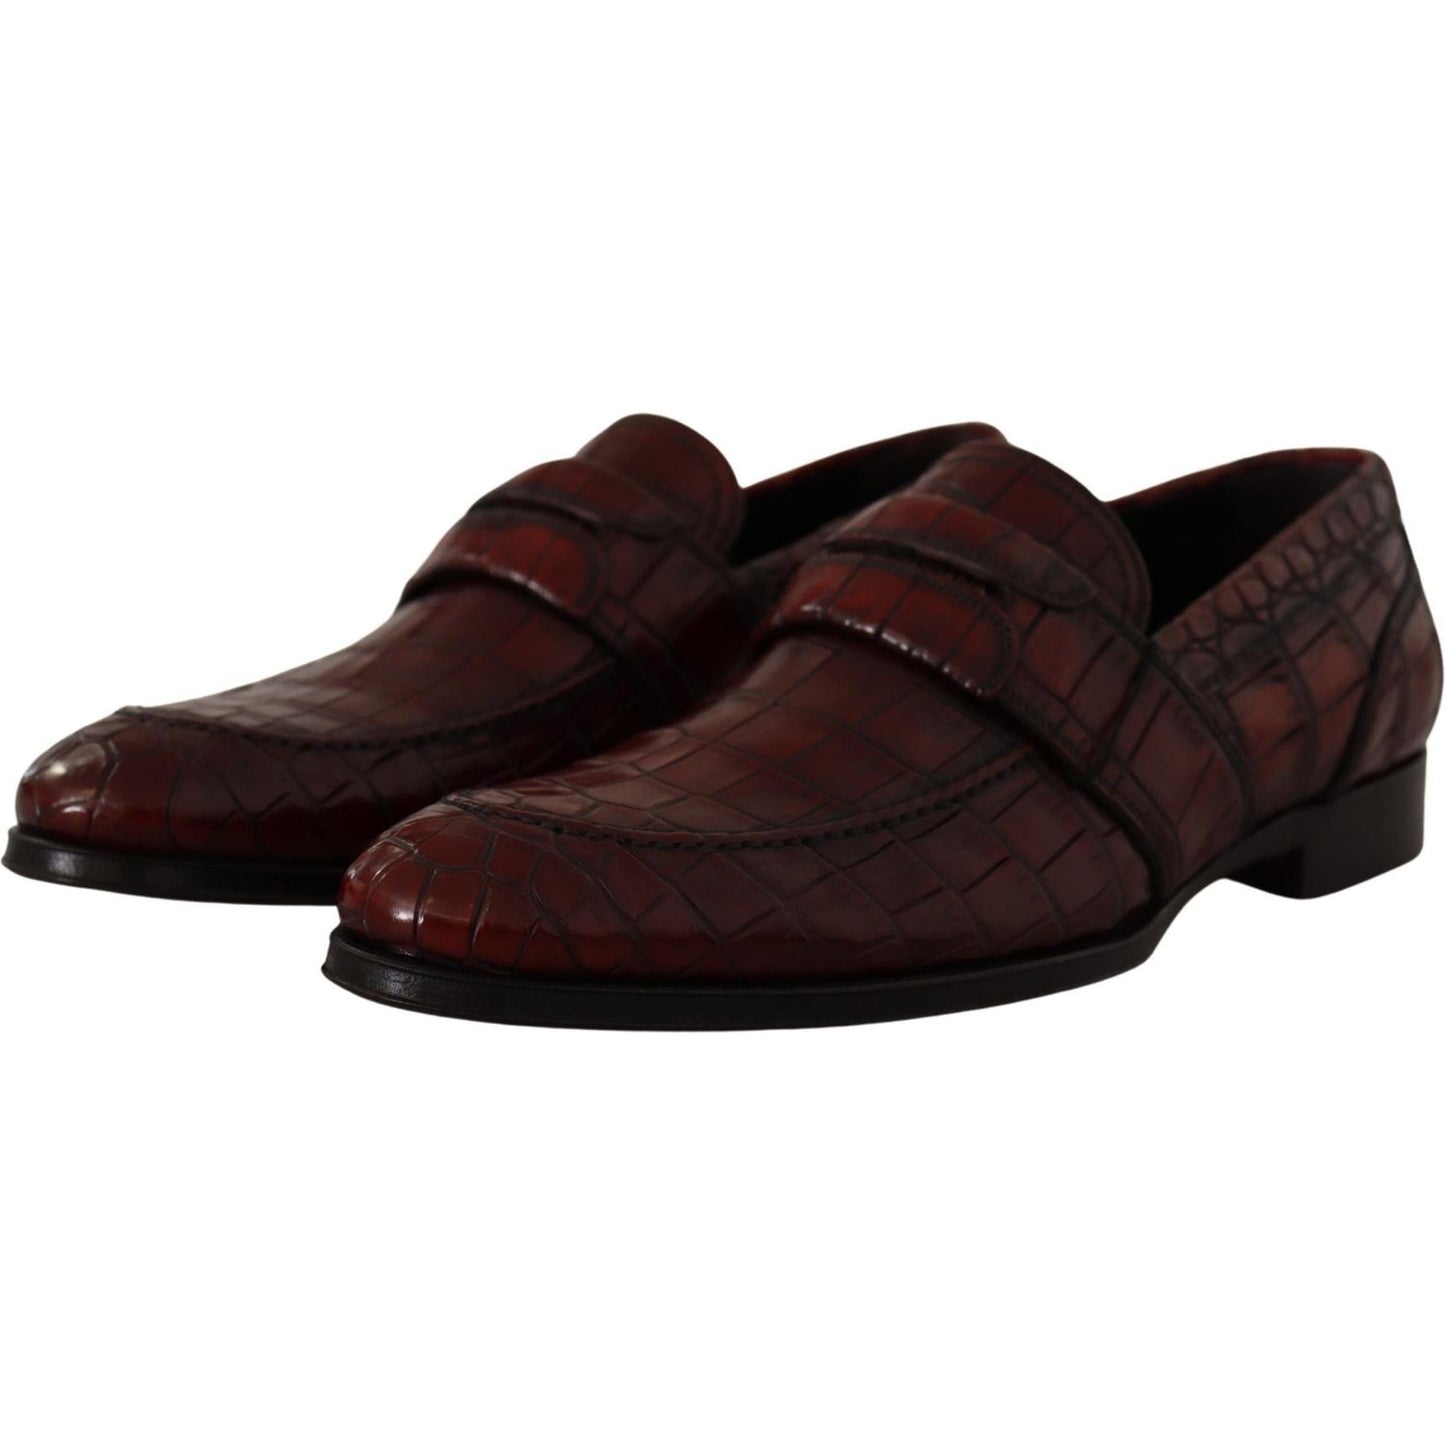 Dolce & Gabbana Exotic Croc Leather Bordeaux Loafers bordeaux-exotic-leather-dress-derby-shoes IMG_2082-scaled-ab517bff-a95.jpg